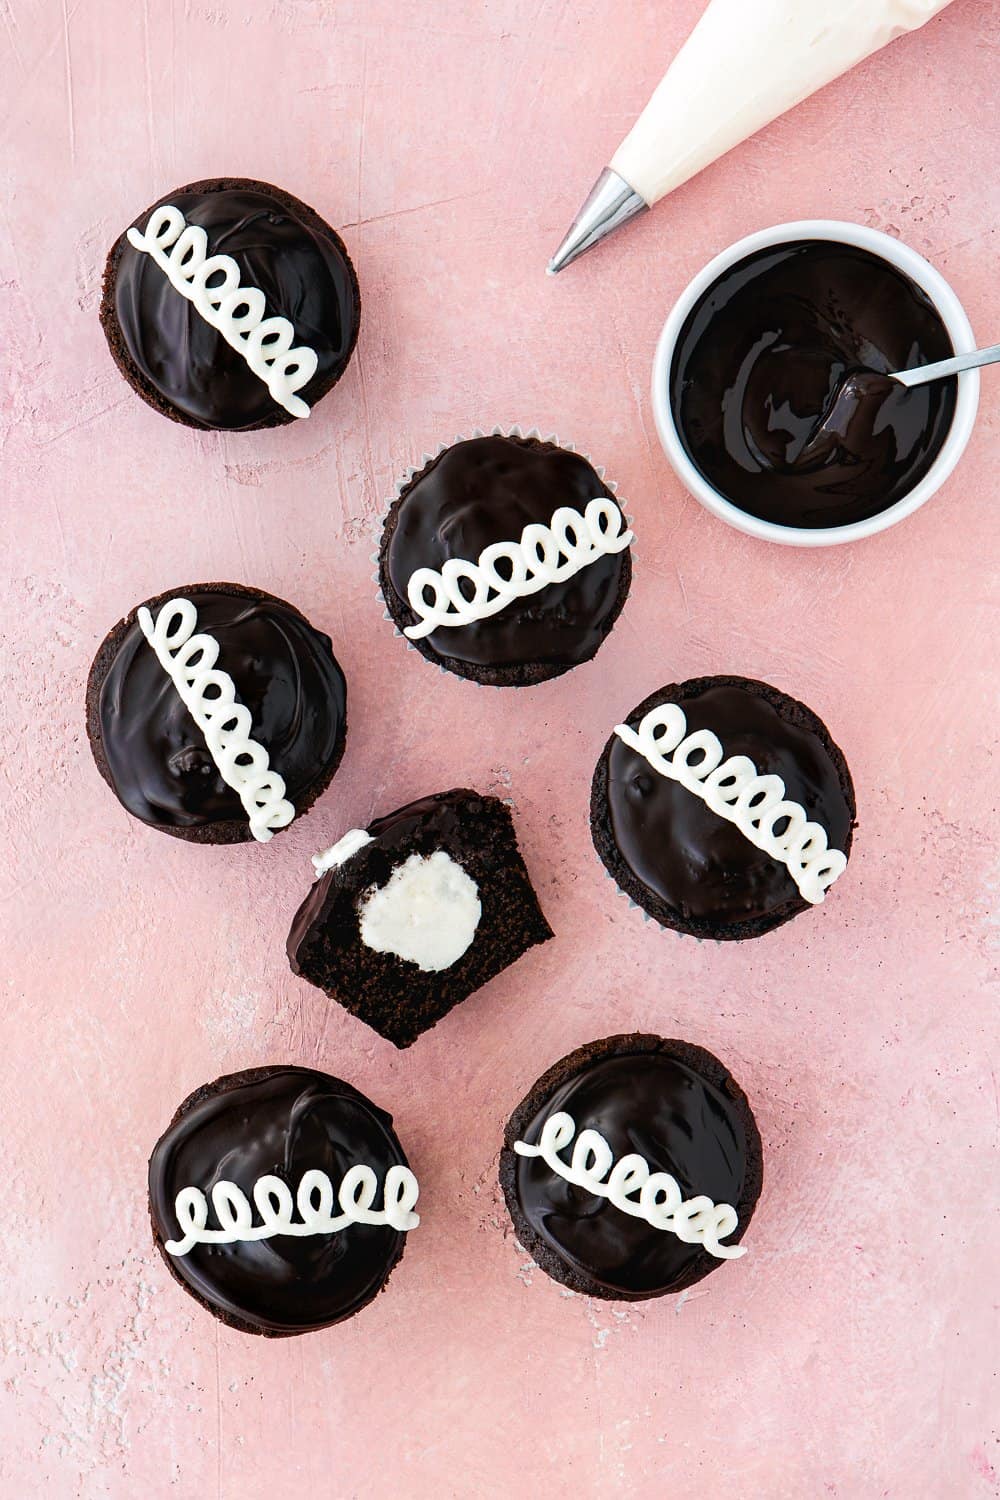 egg-free homemade hostess cupcakes over a pink surface. 